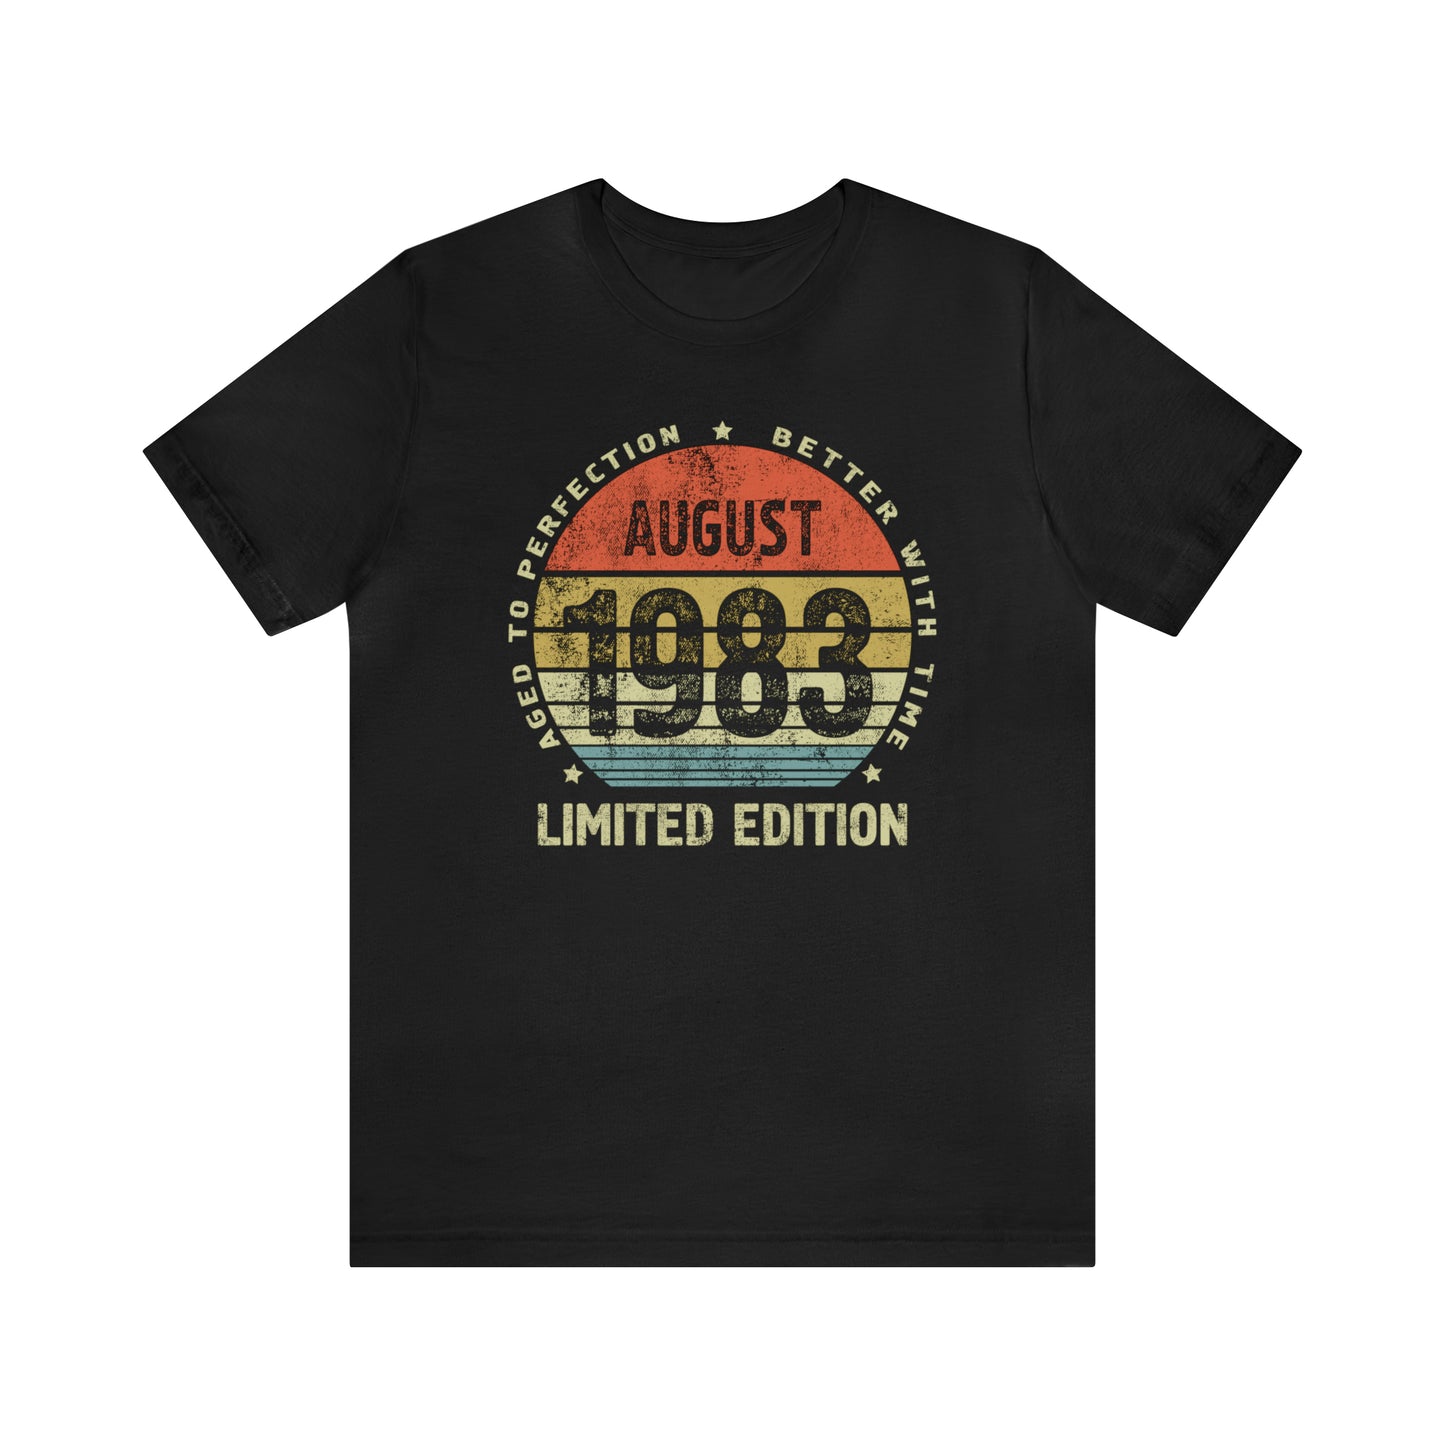 40th birthday gift for men or women, August 1983 birthday gift shirt for wife or husband, 40 anniversary Shirt for brother or sister